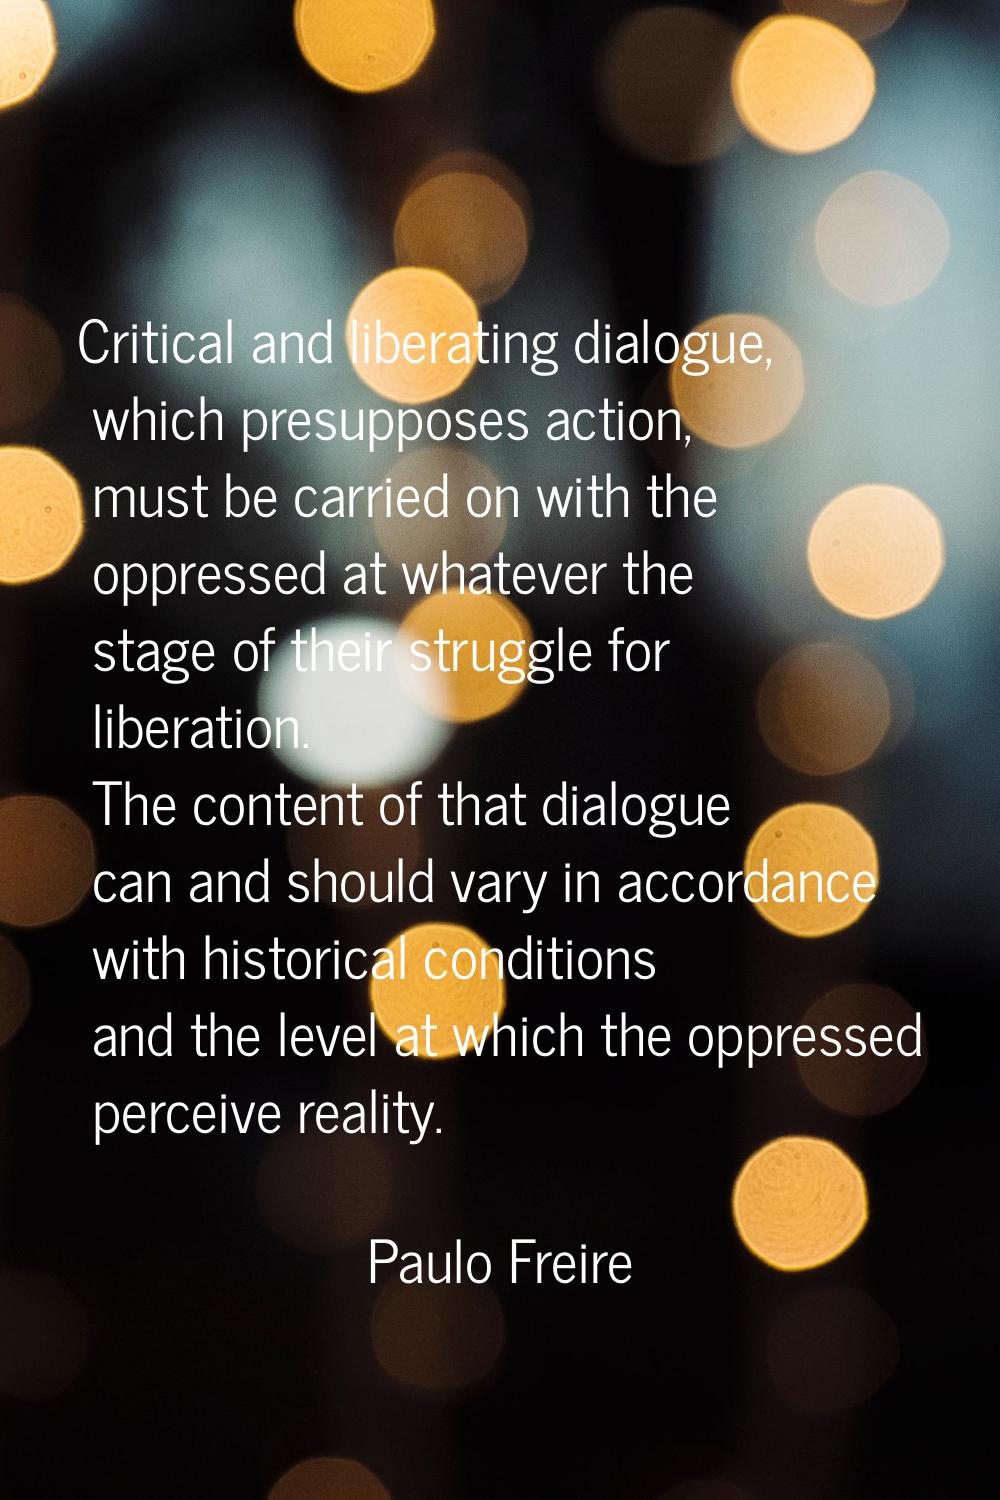 Critical and liberating dialogue, which presupposes action, must be carried on with the oppressed a